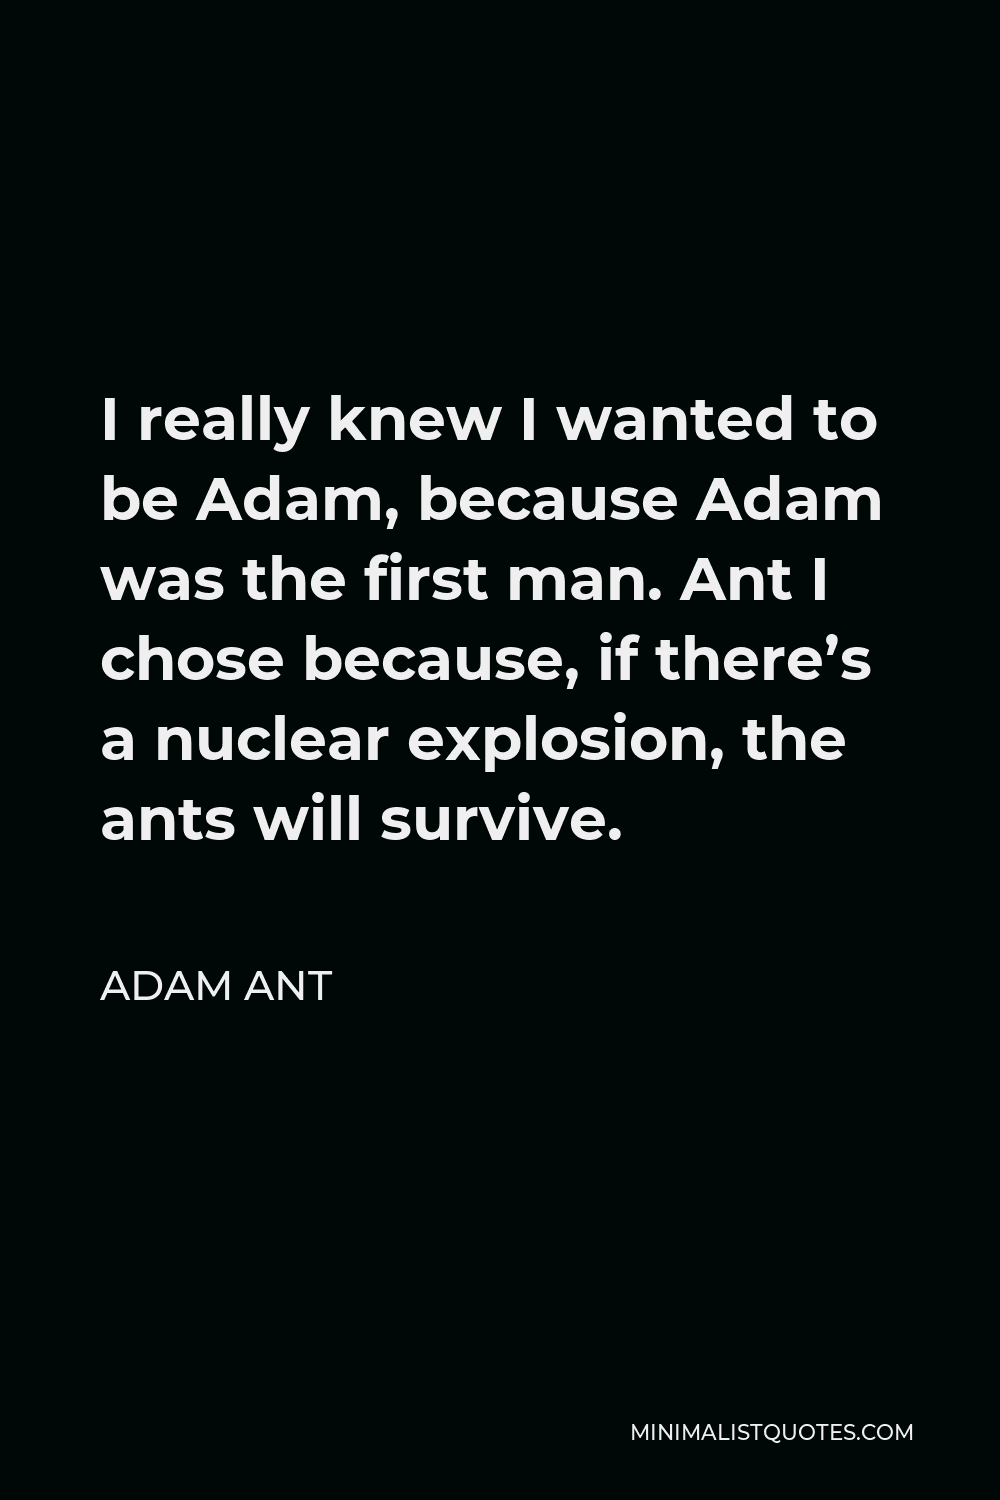 Adam Ant Quote - I really knew I wanted to be Adam, because Adam was the first man. Ant I chose because, if there’s a nuclear explosion, the ants will survive.